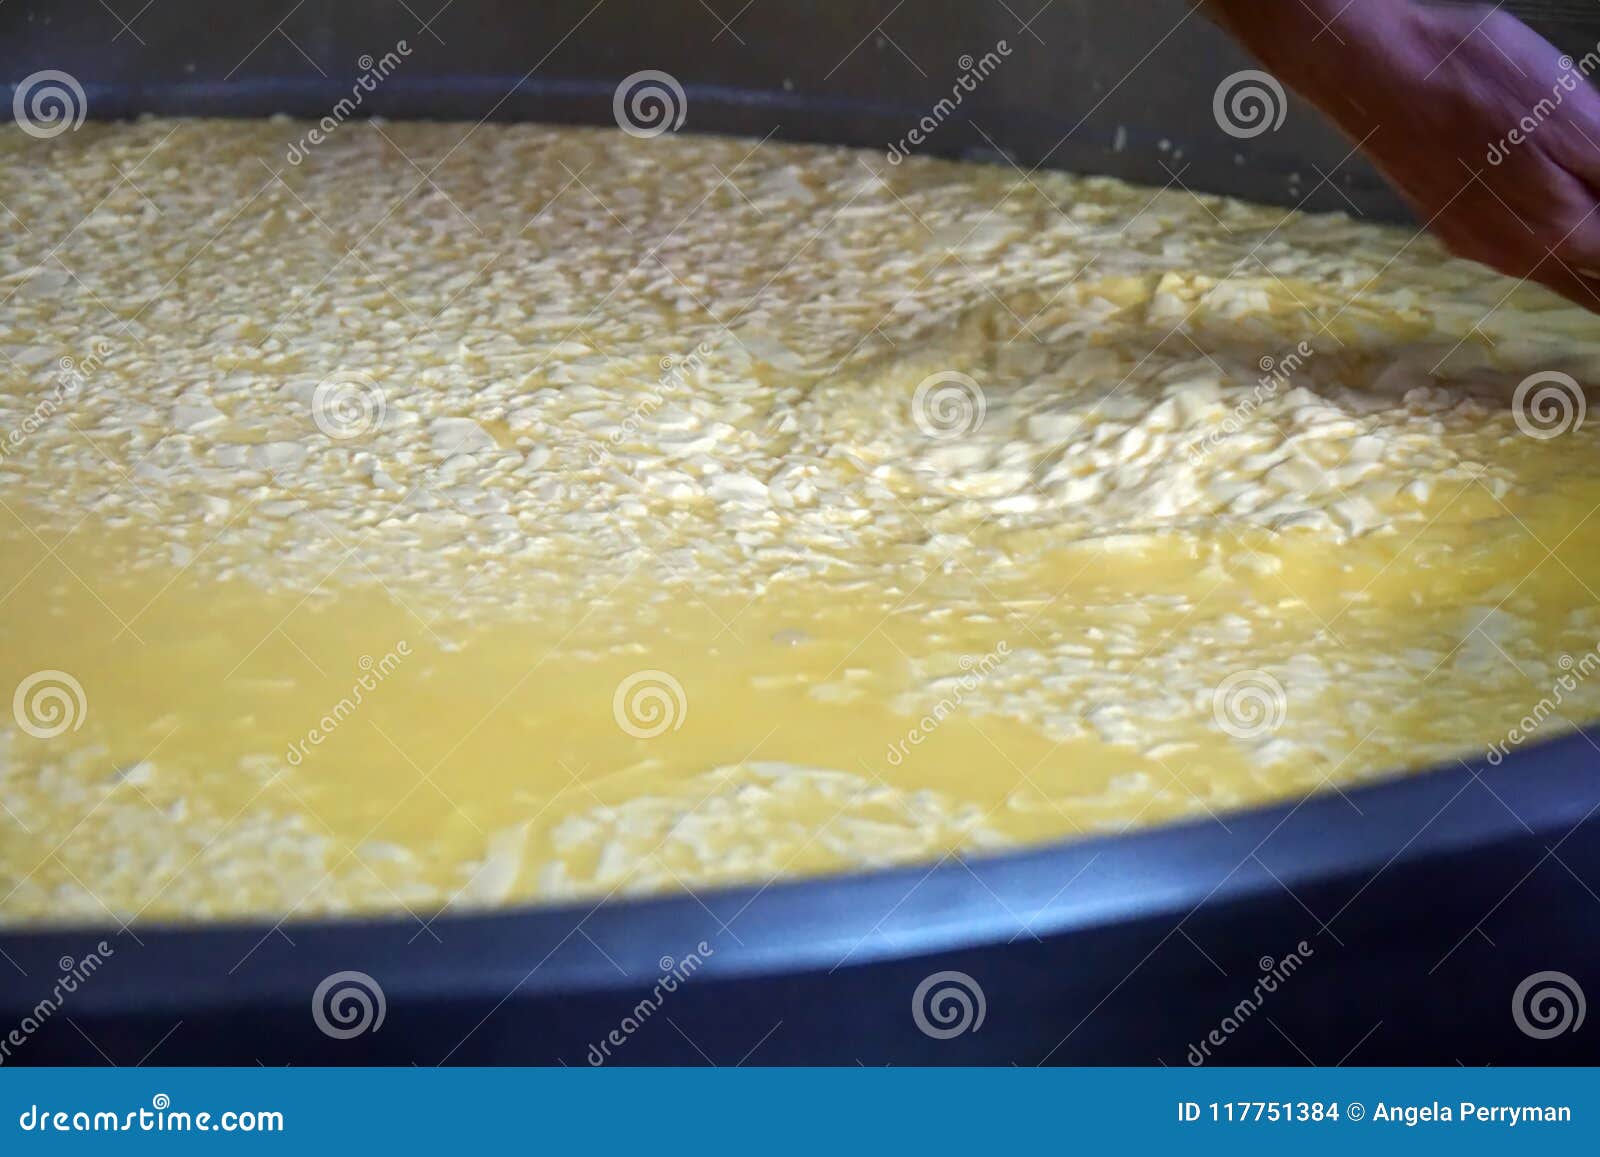 Vat Of Cheese Curds And Whey Stock Photo Image Of South Ecuador